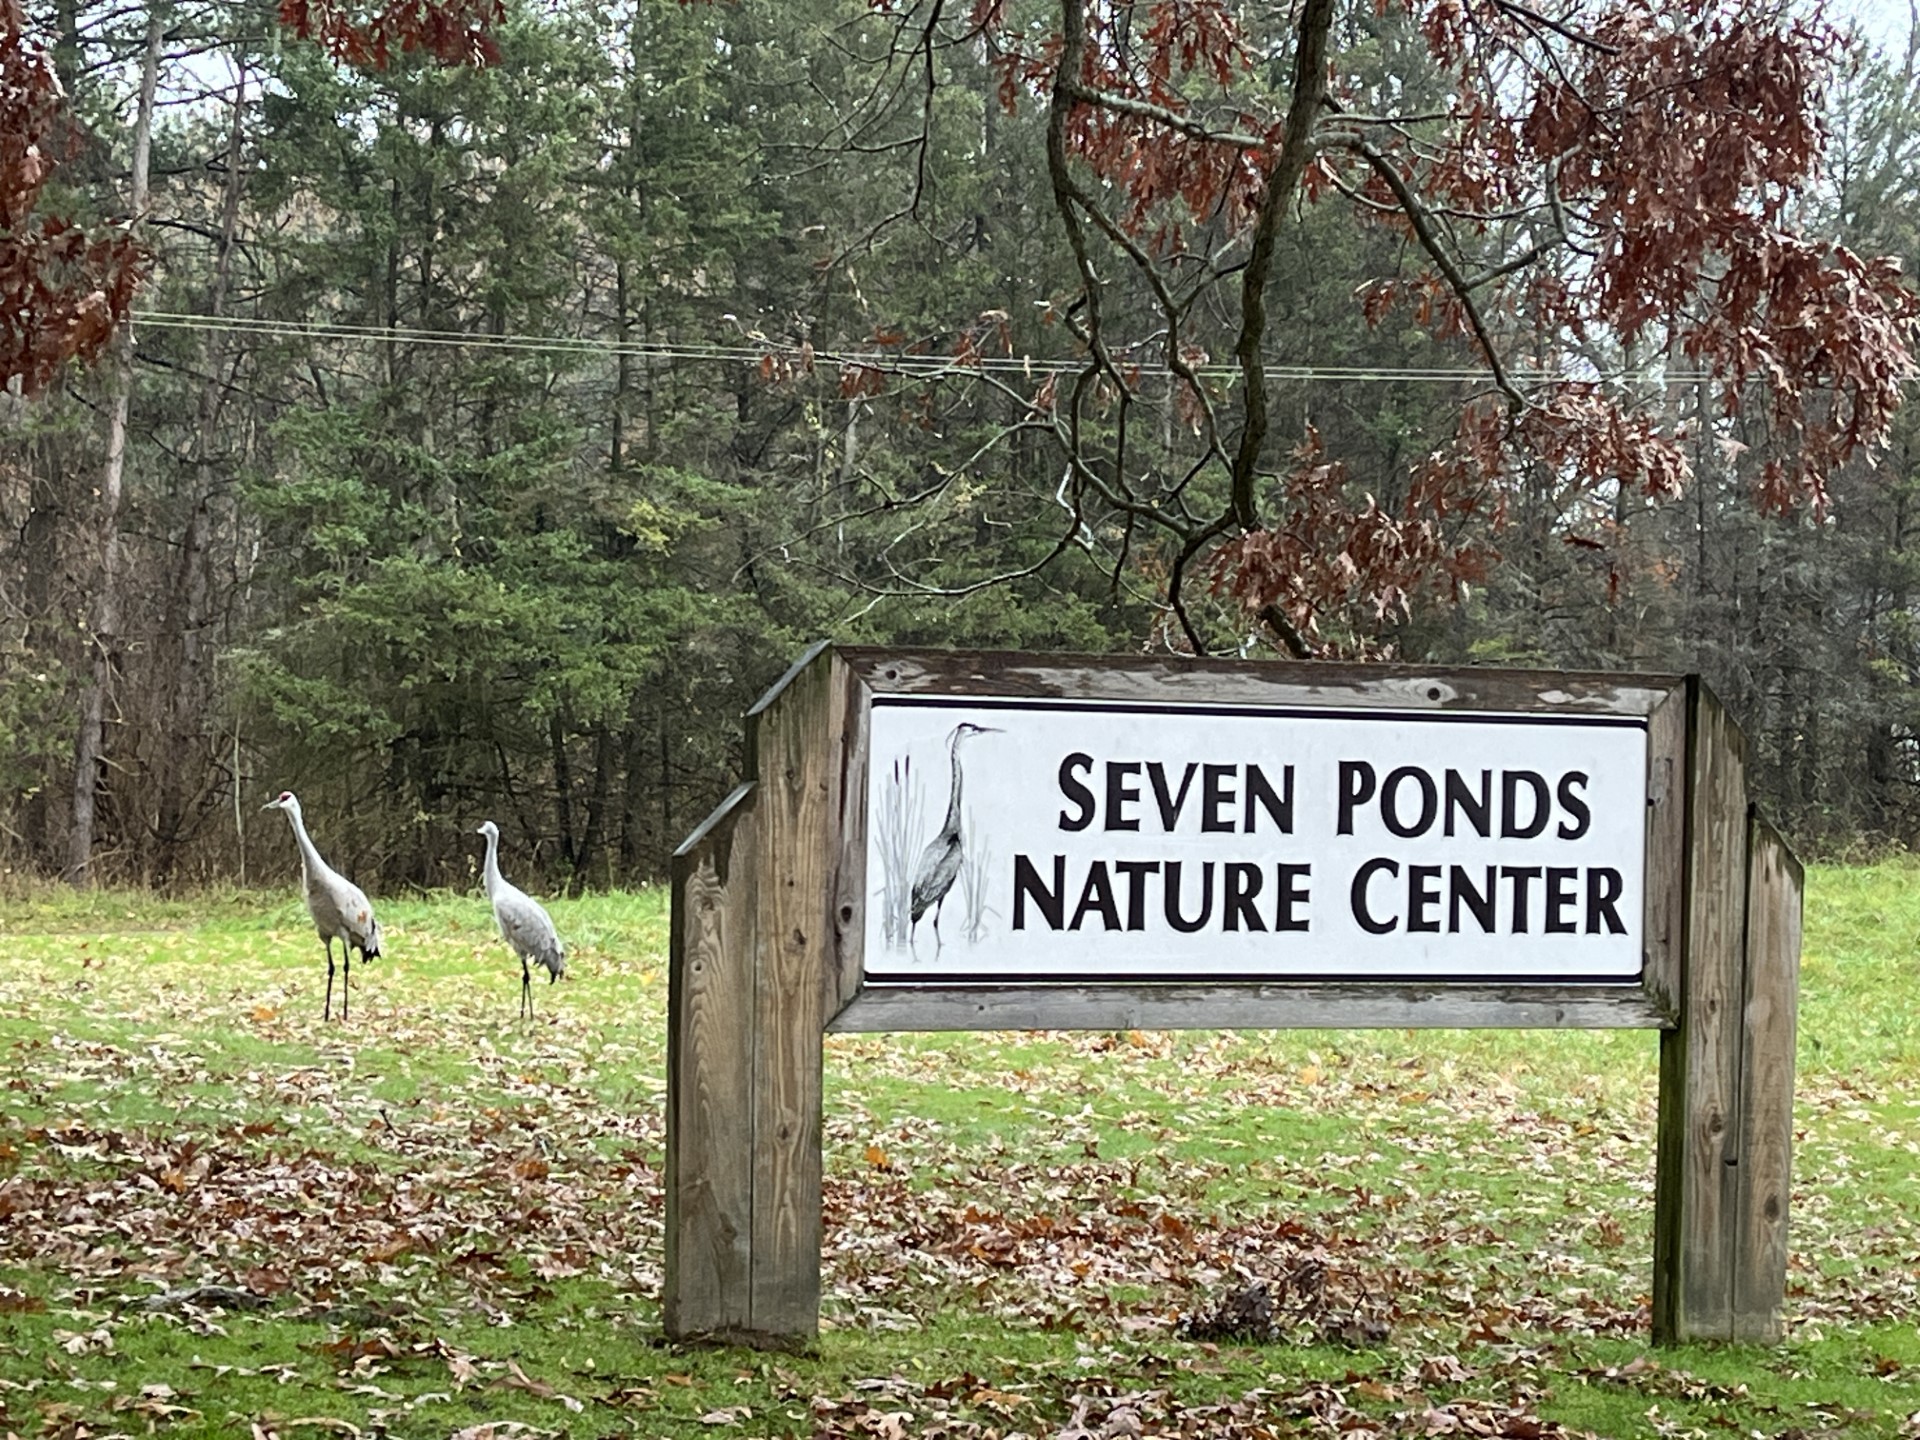 "Our" Sandhill Cranes, pictured on November 8 watching over our welcome sign.